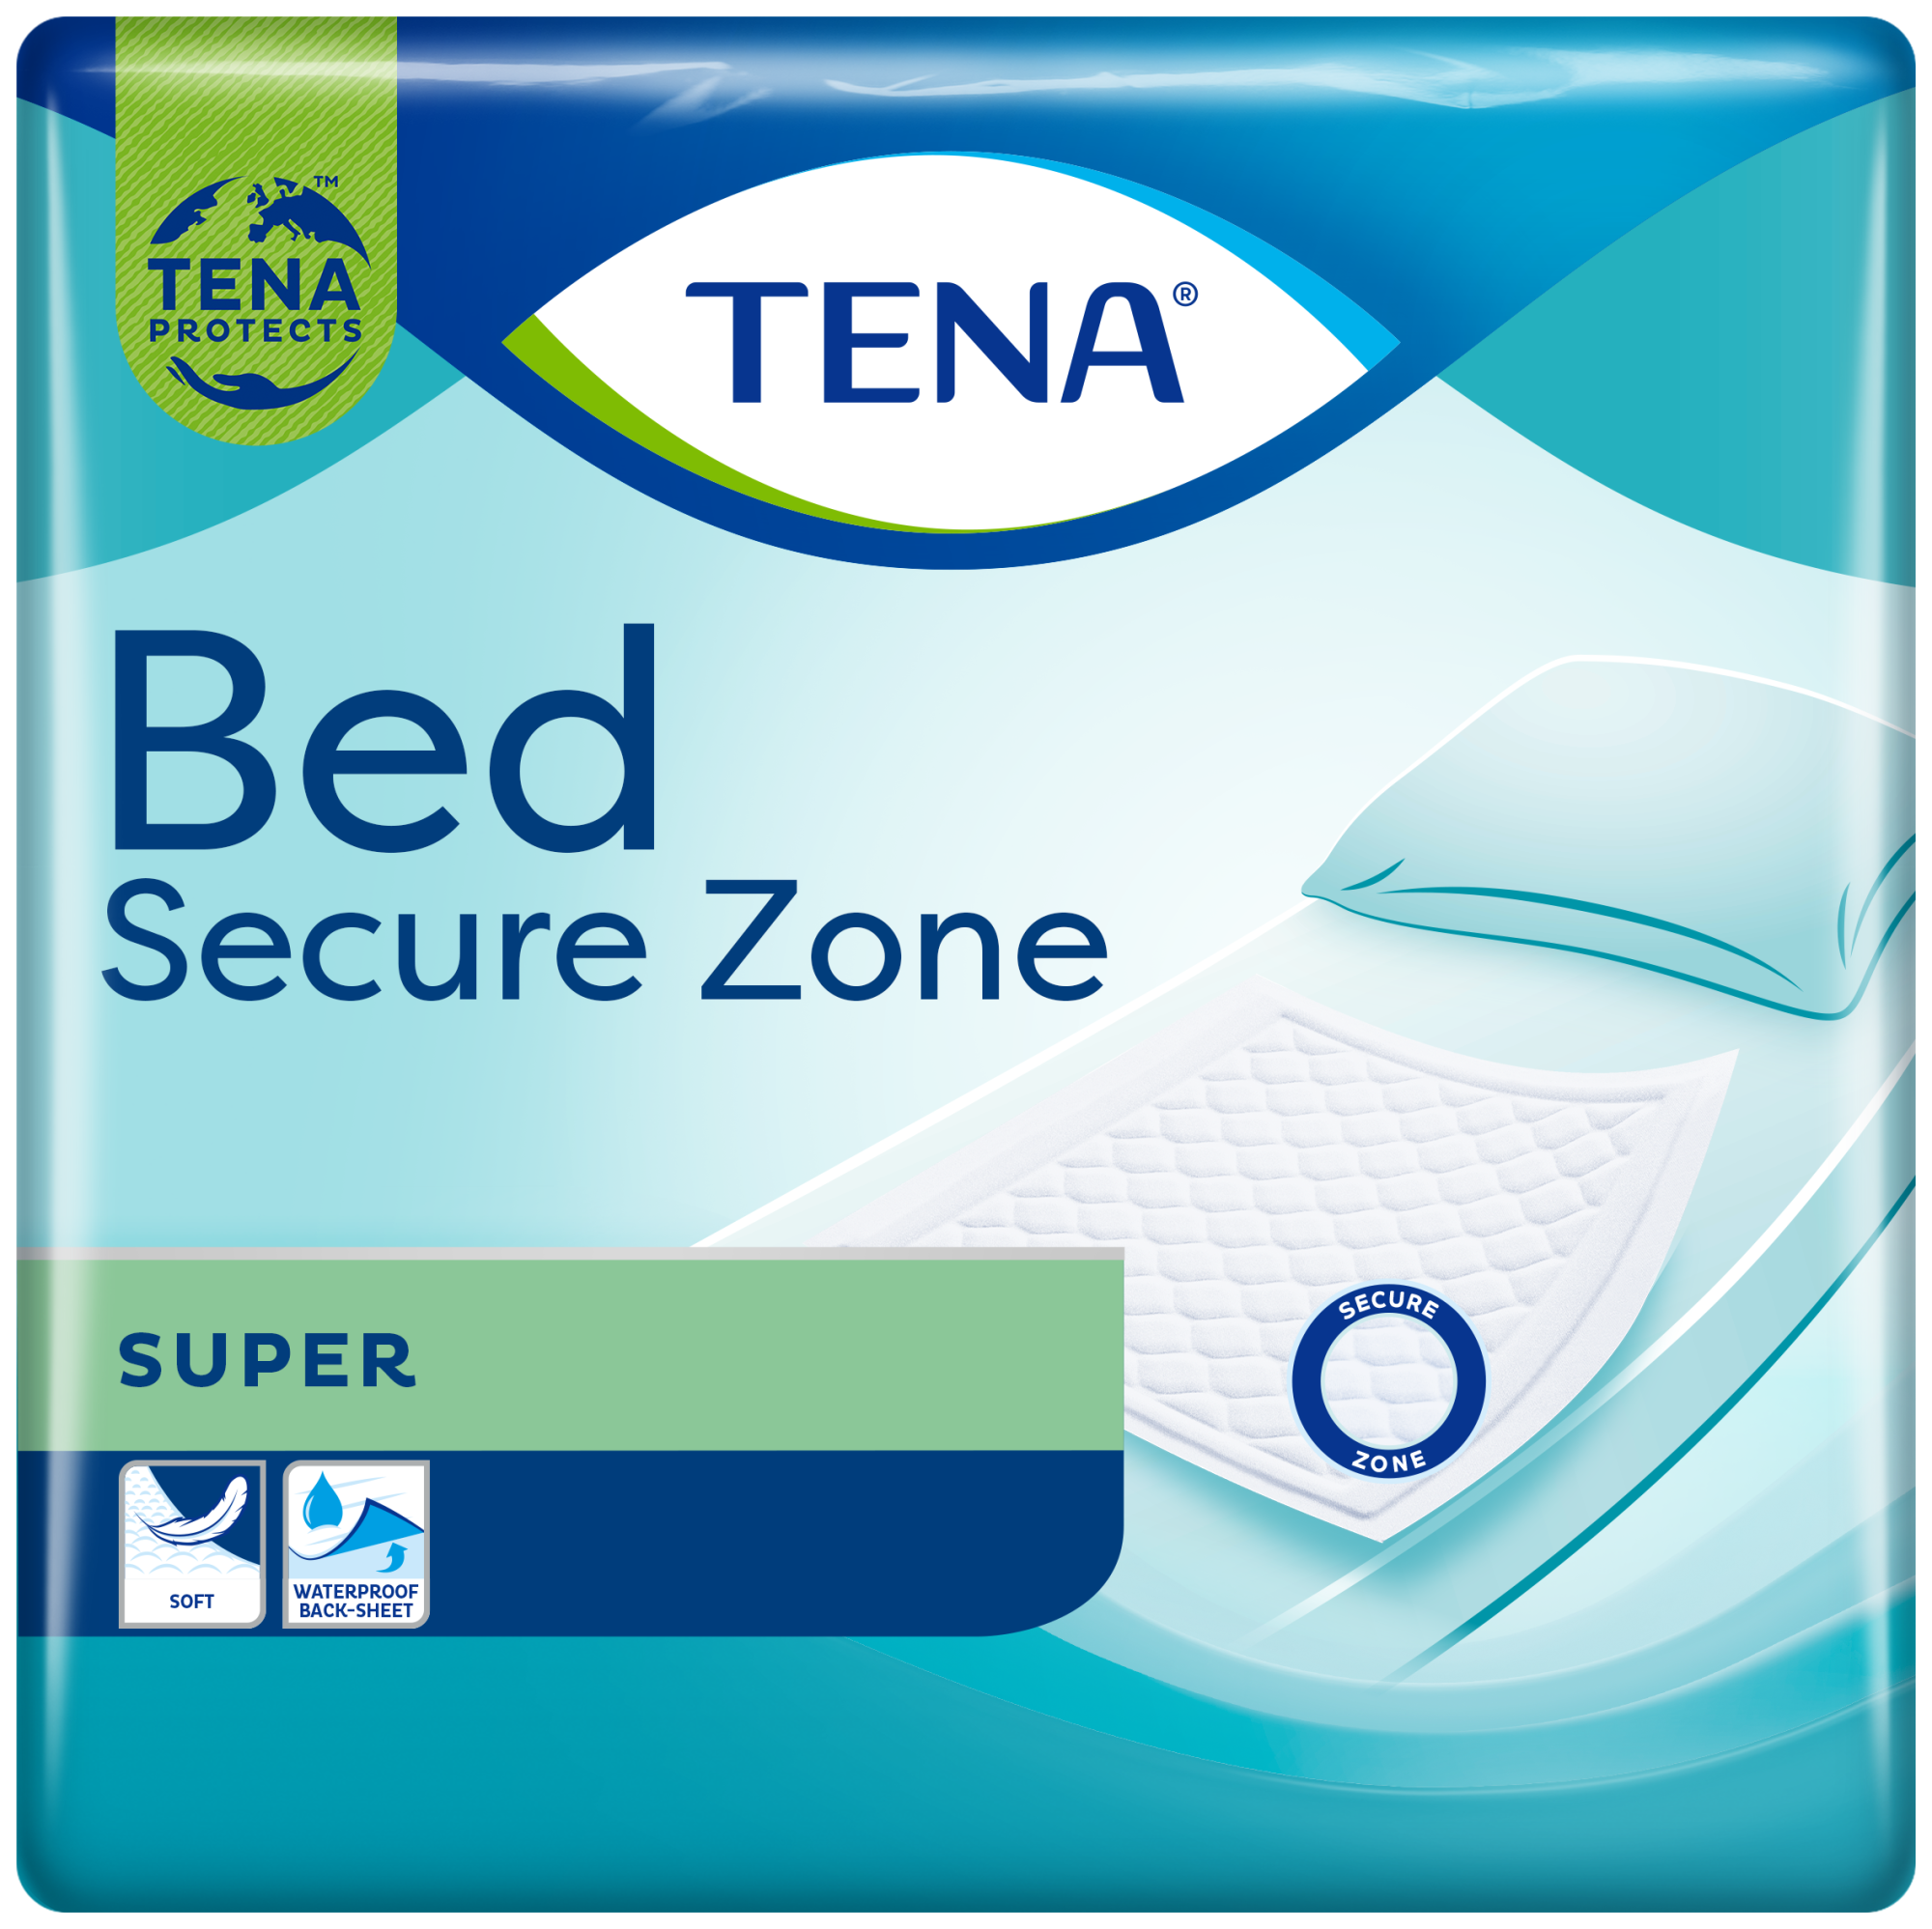 TENA Bed Secure Zone Super | Soft & comfortable Incontinence bed pad